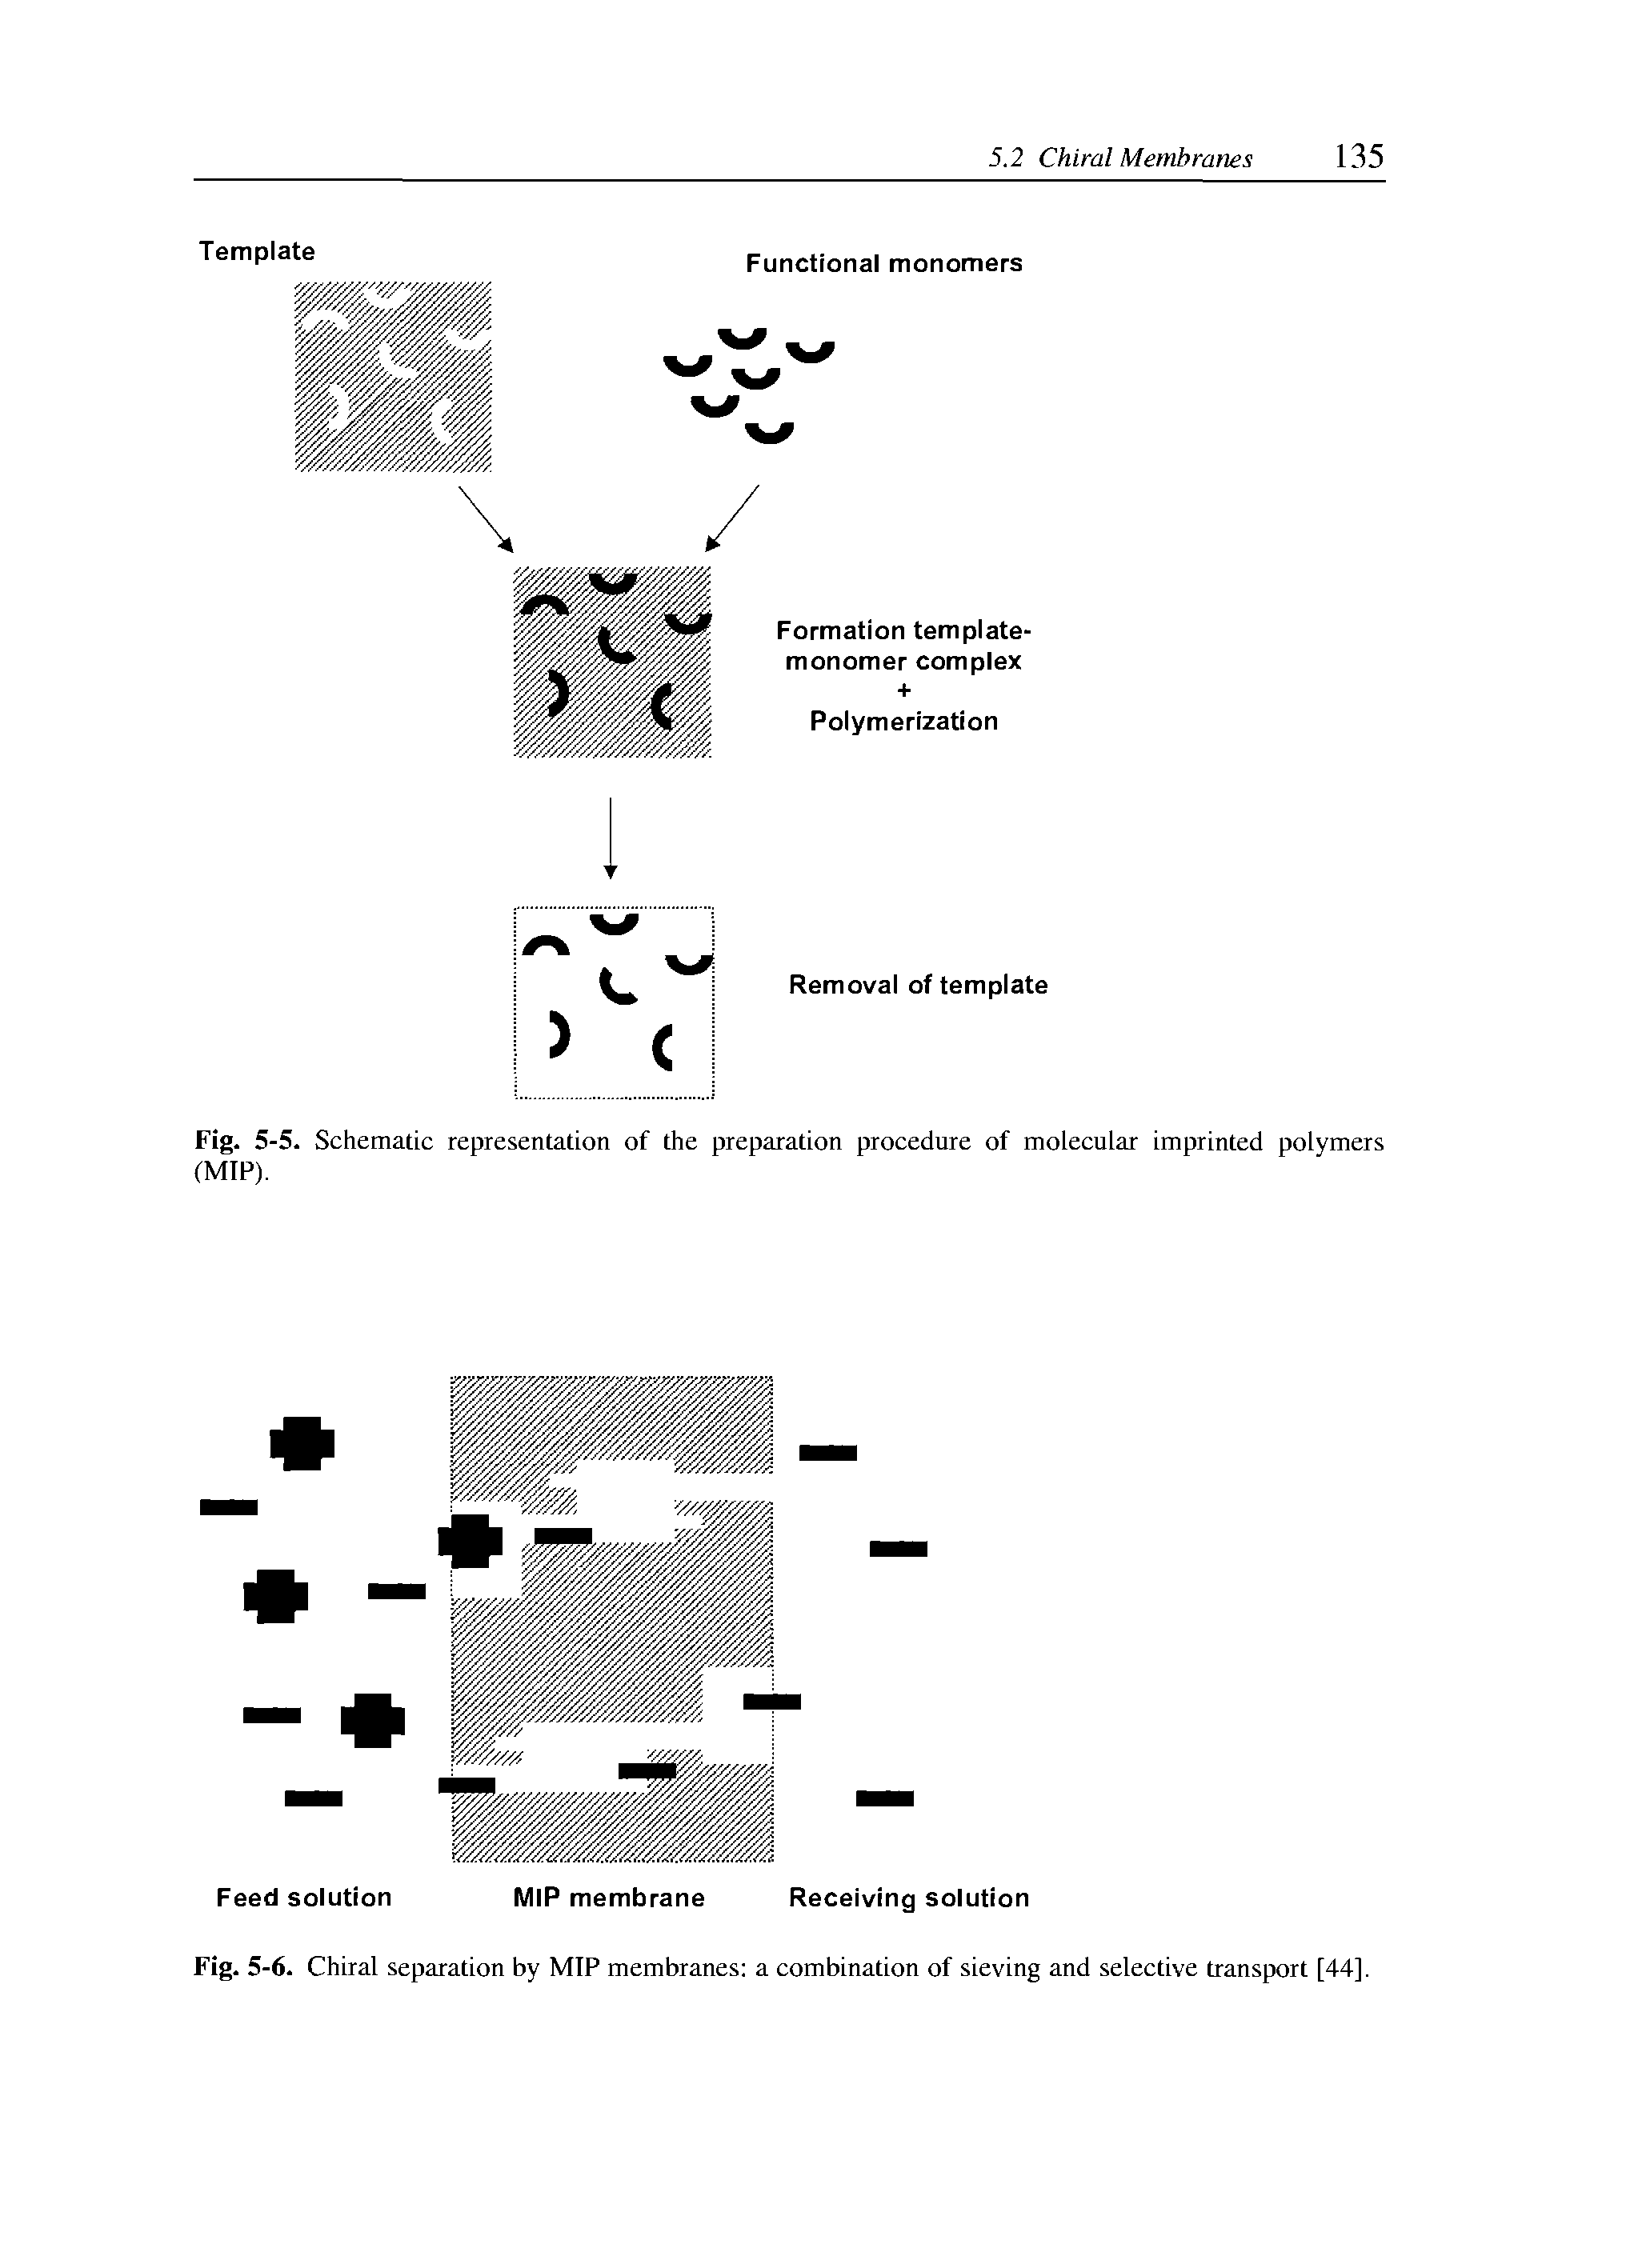 Fig. 5-5. Schematic representation of the preparation procedure of molecular imprinted polymers (MIP).